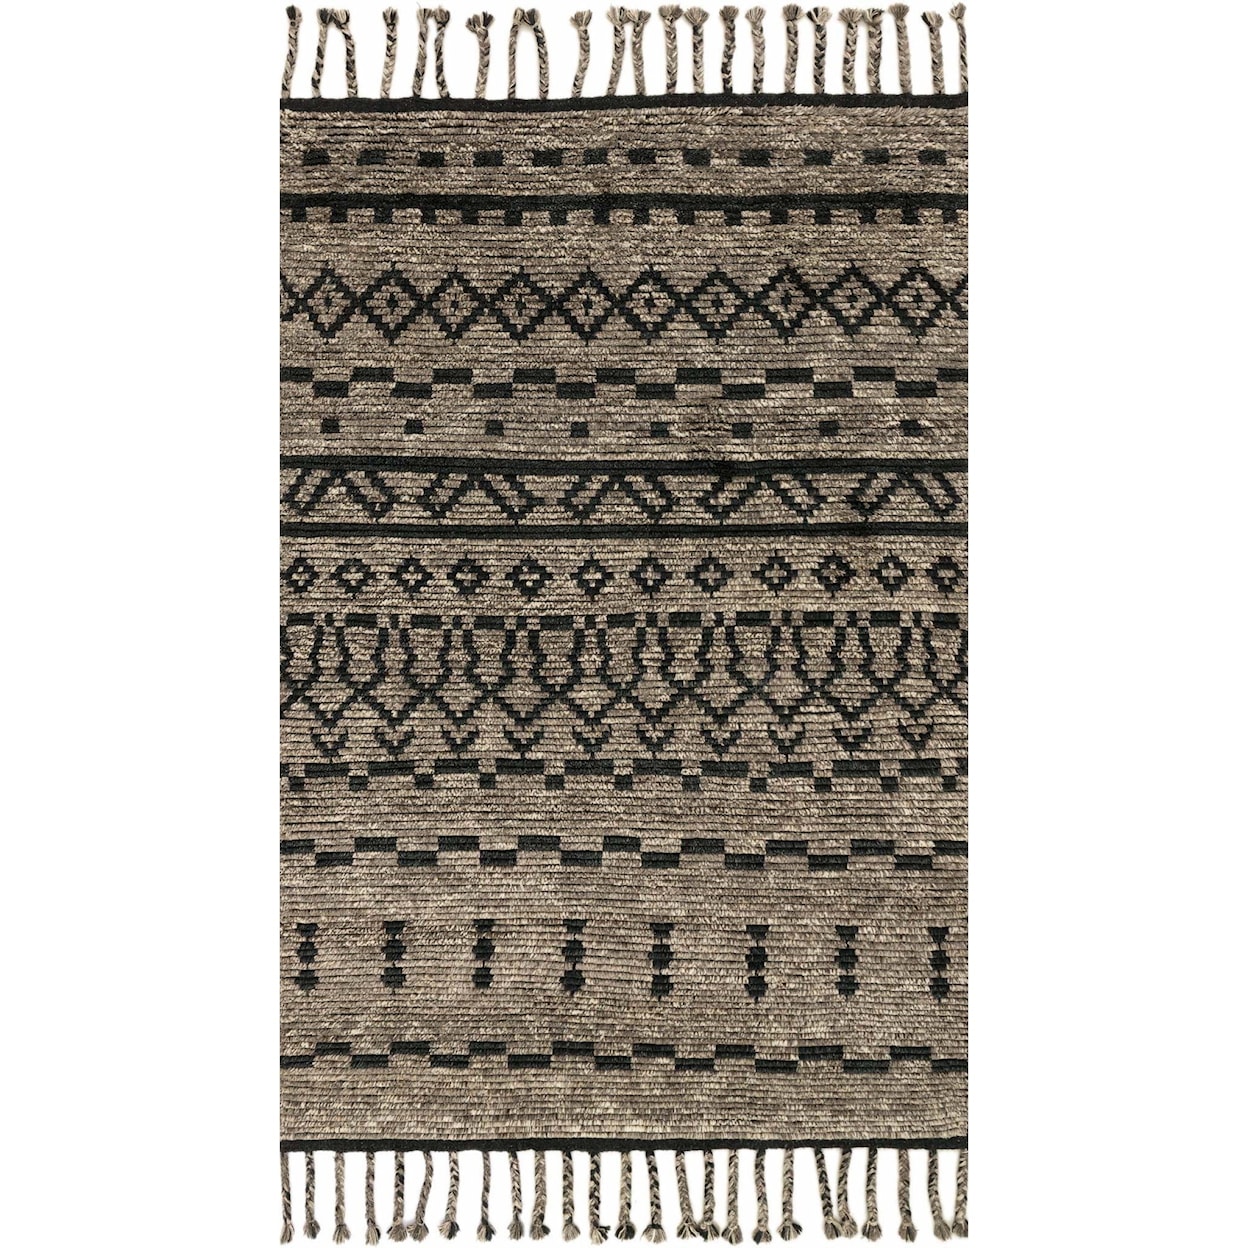 Magnolia Home by Joanna Gaines for Loloi Tulum 2' 0" x 3' 0" Rectangle Rug